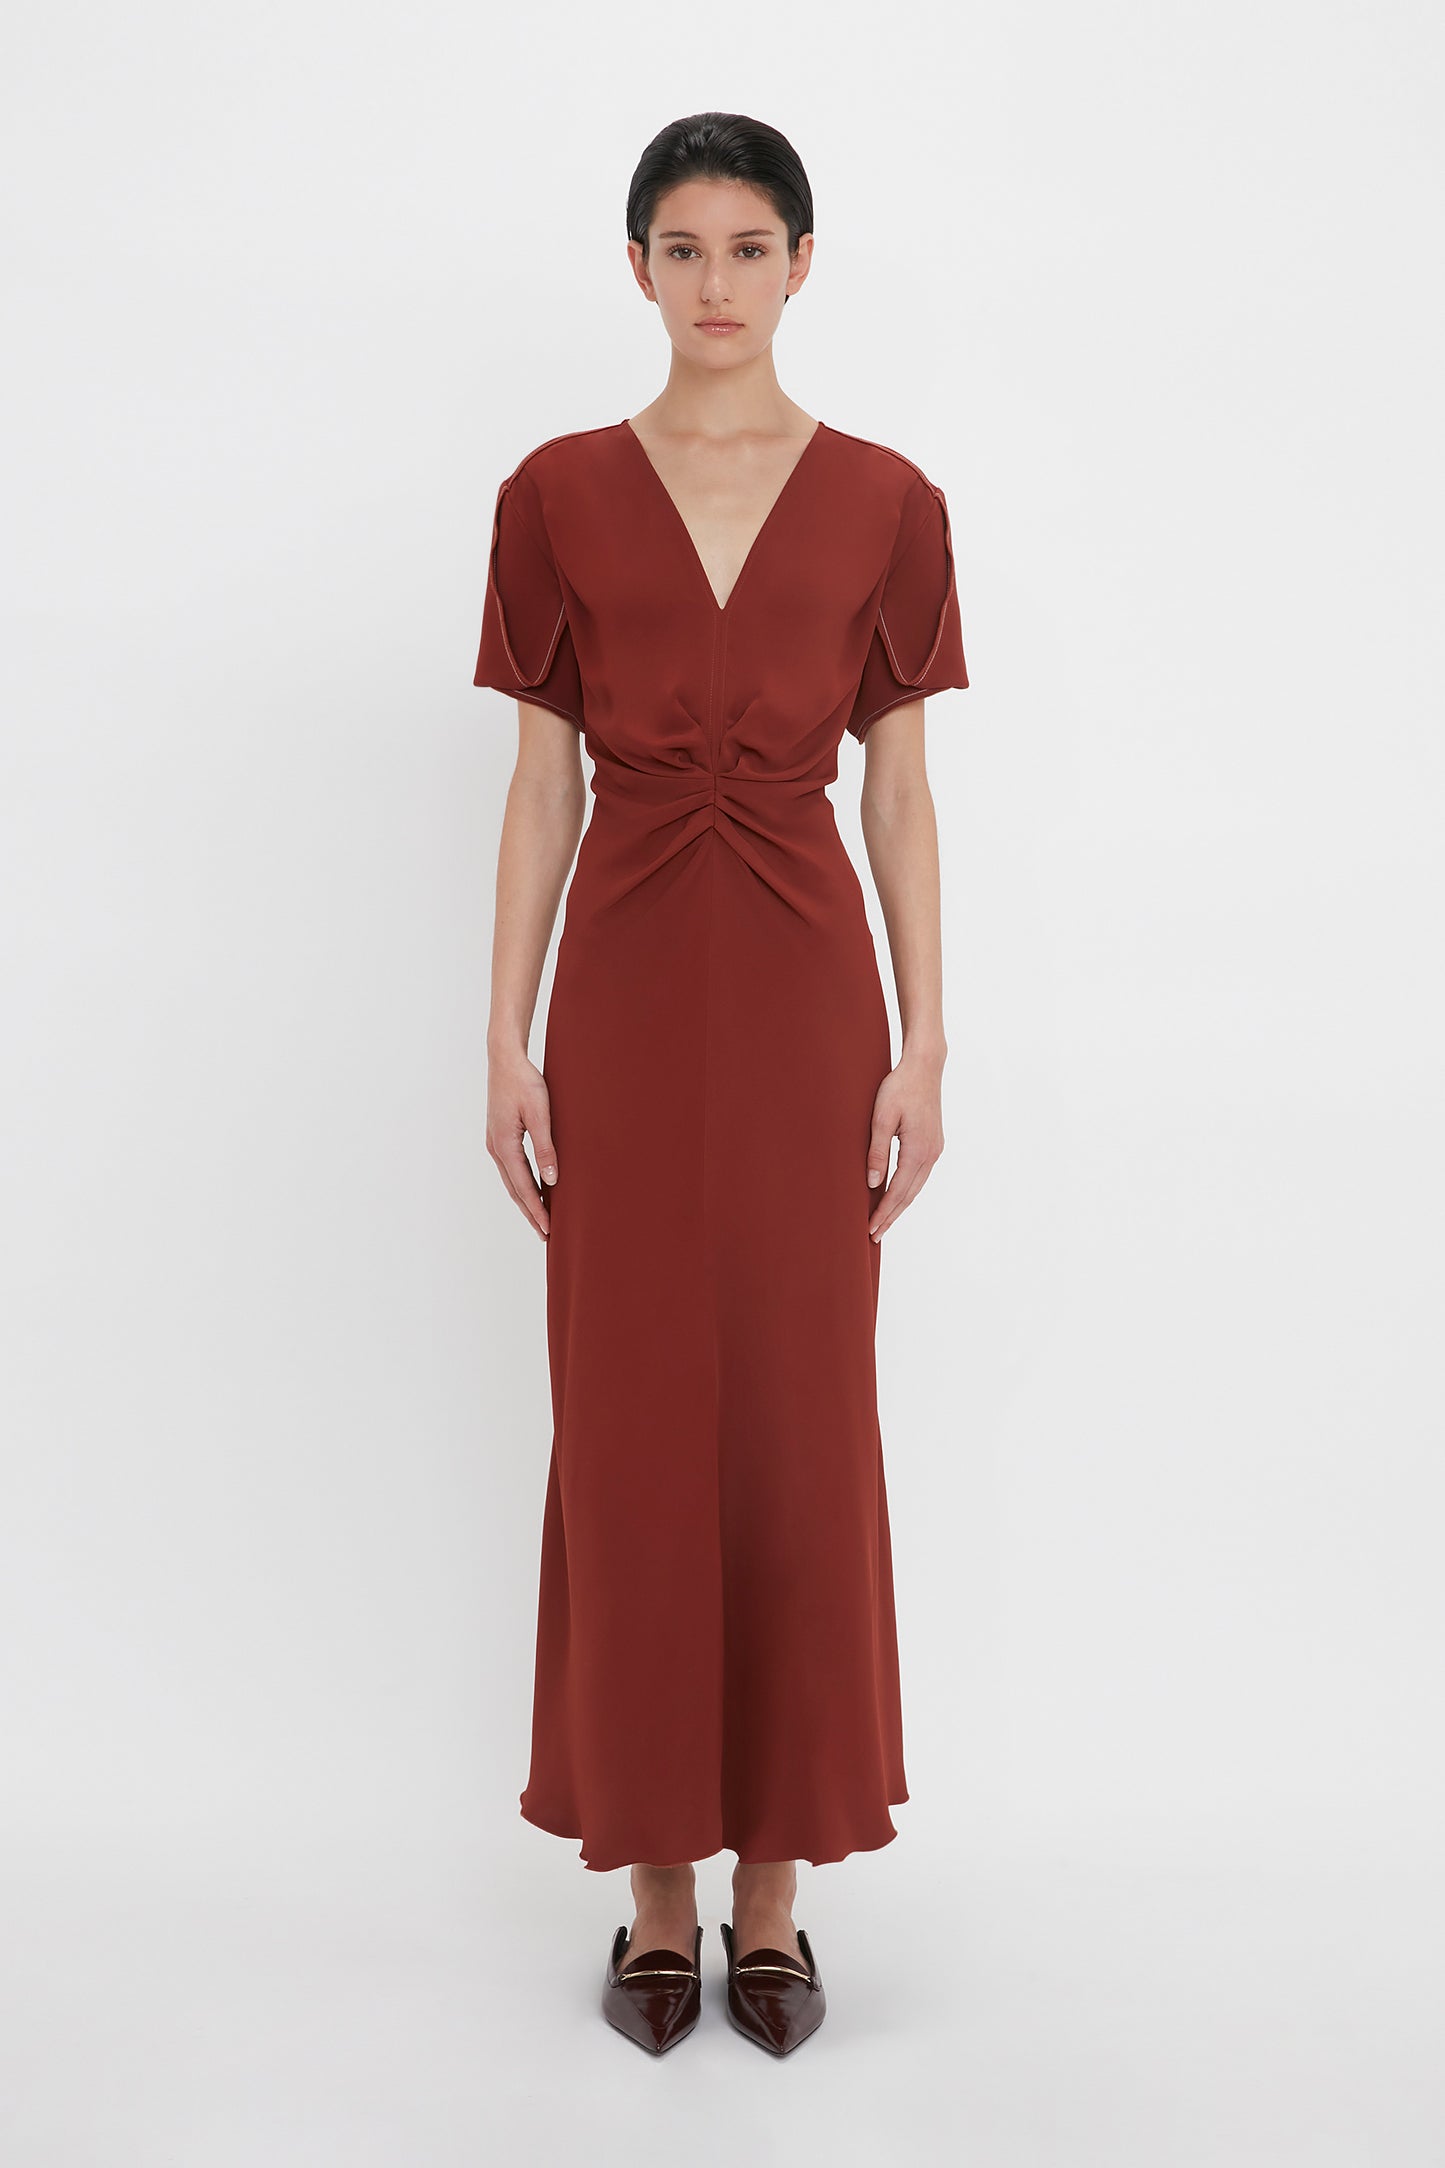 A person stands against a white background wearing a Gathered V-Neck Midi Dress In Russet by Victoria Beckham. The short-sleeved dress, made from figure-flattering stretch fabric, features a waist-defining pleat detail and knotted accent. The individual has short, dark hair and pointed shoes.